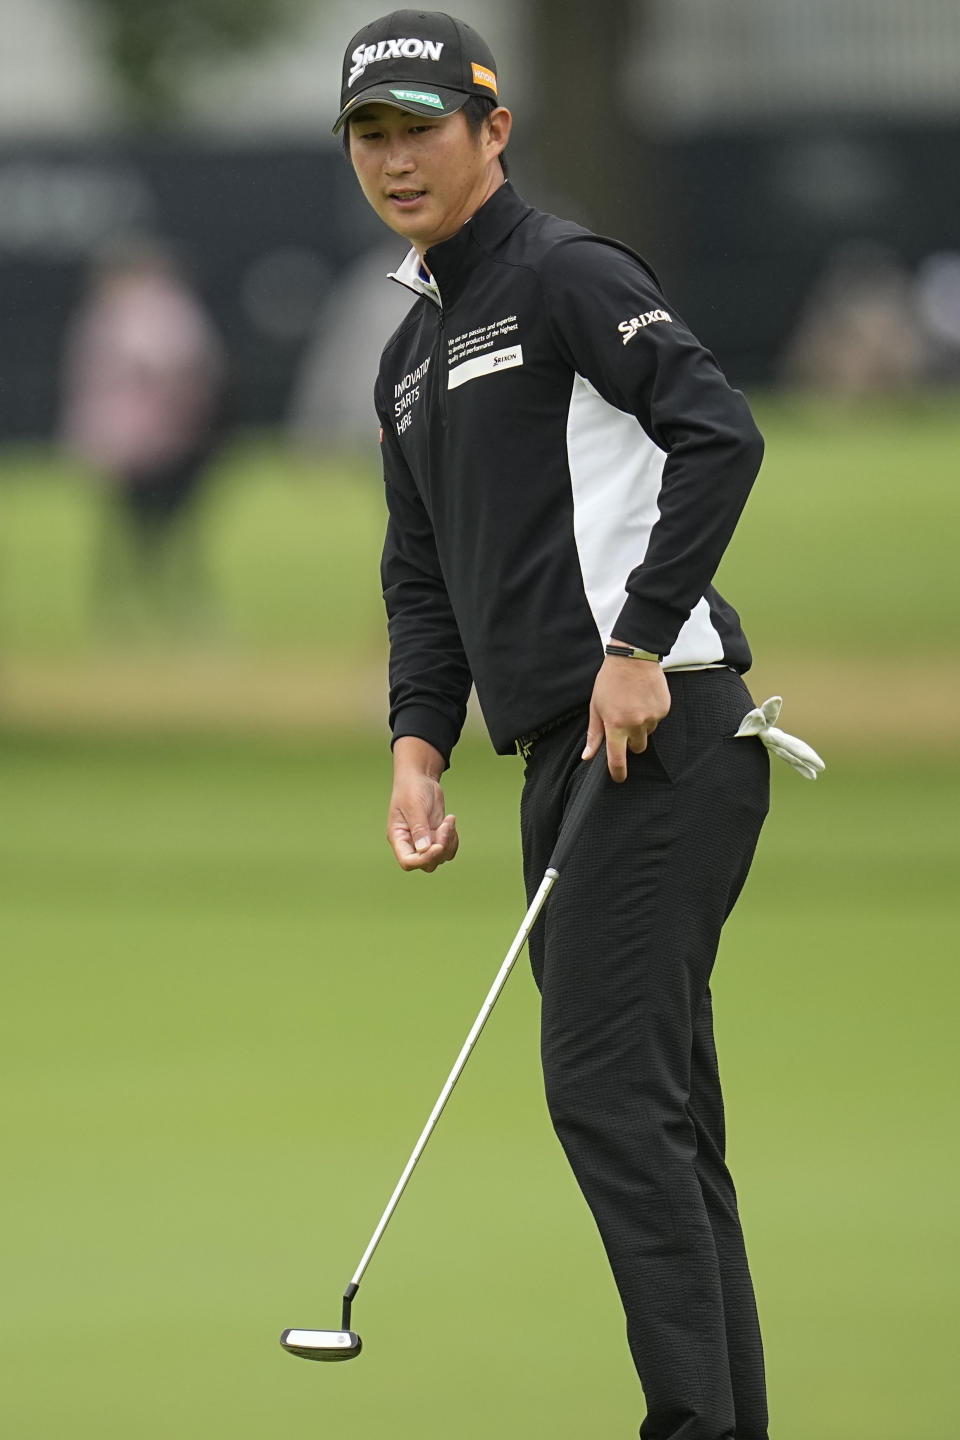 Rikuya Hoshino, of Japan, putts on the 17th hole during the third round of the PGA Championship golf tournament at Southern Hills Country Club, Saturday, May 21, 2022, in Tulsa, Okla. (AP Photo/Sue Ogrocki)